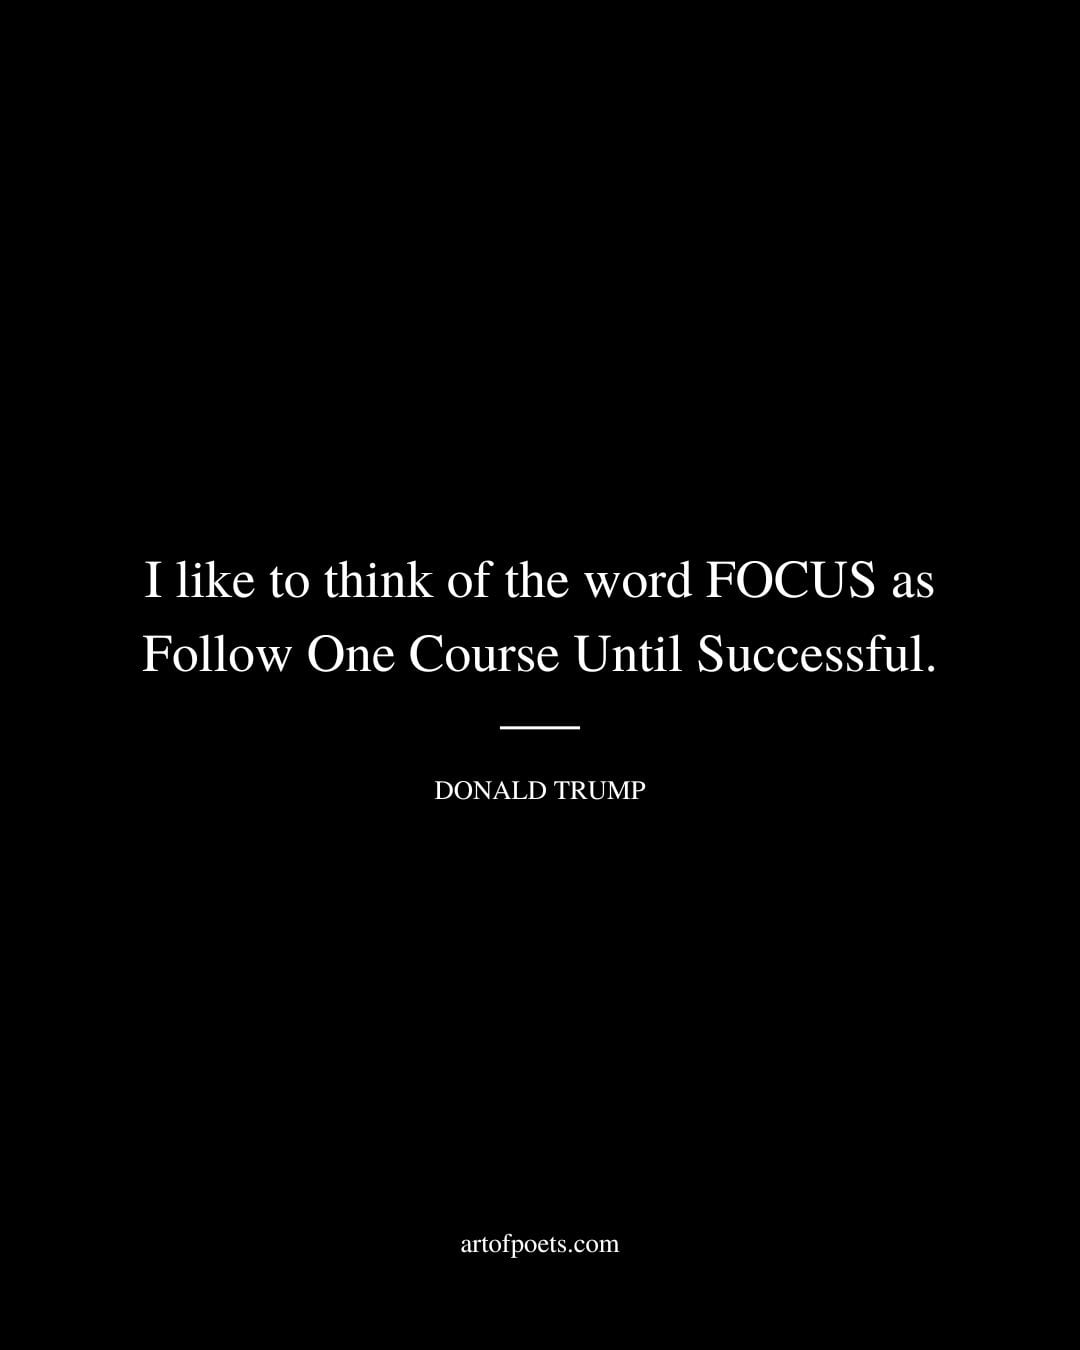 I like to think of the word FOCUS as Follow One Course Until Successful